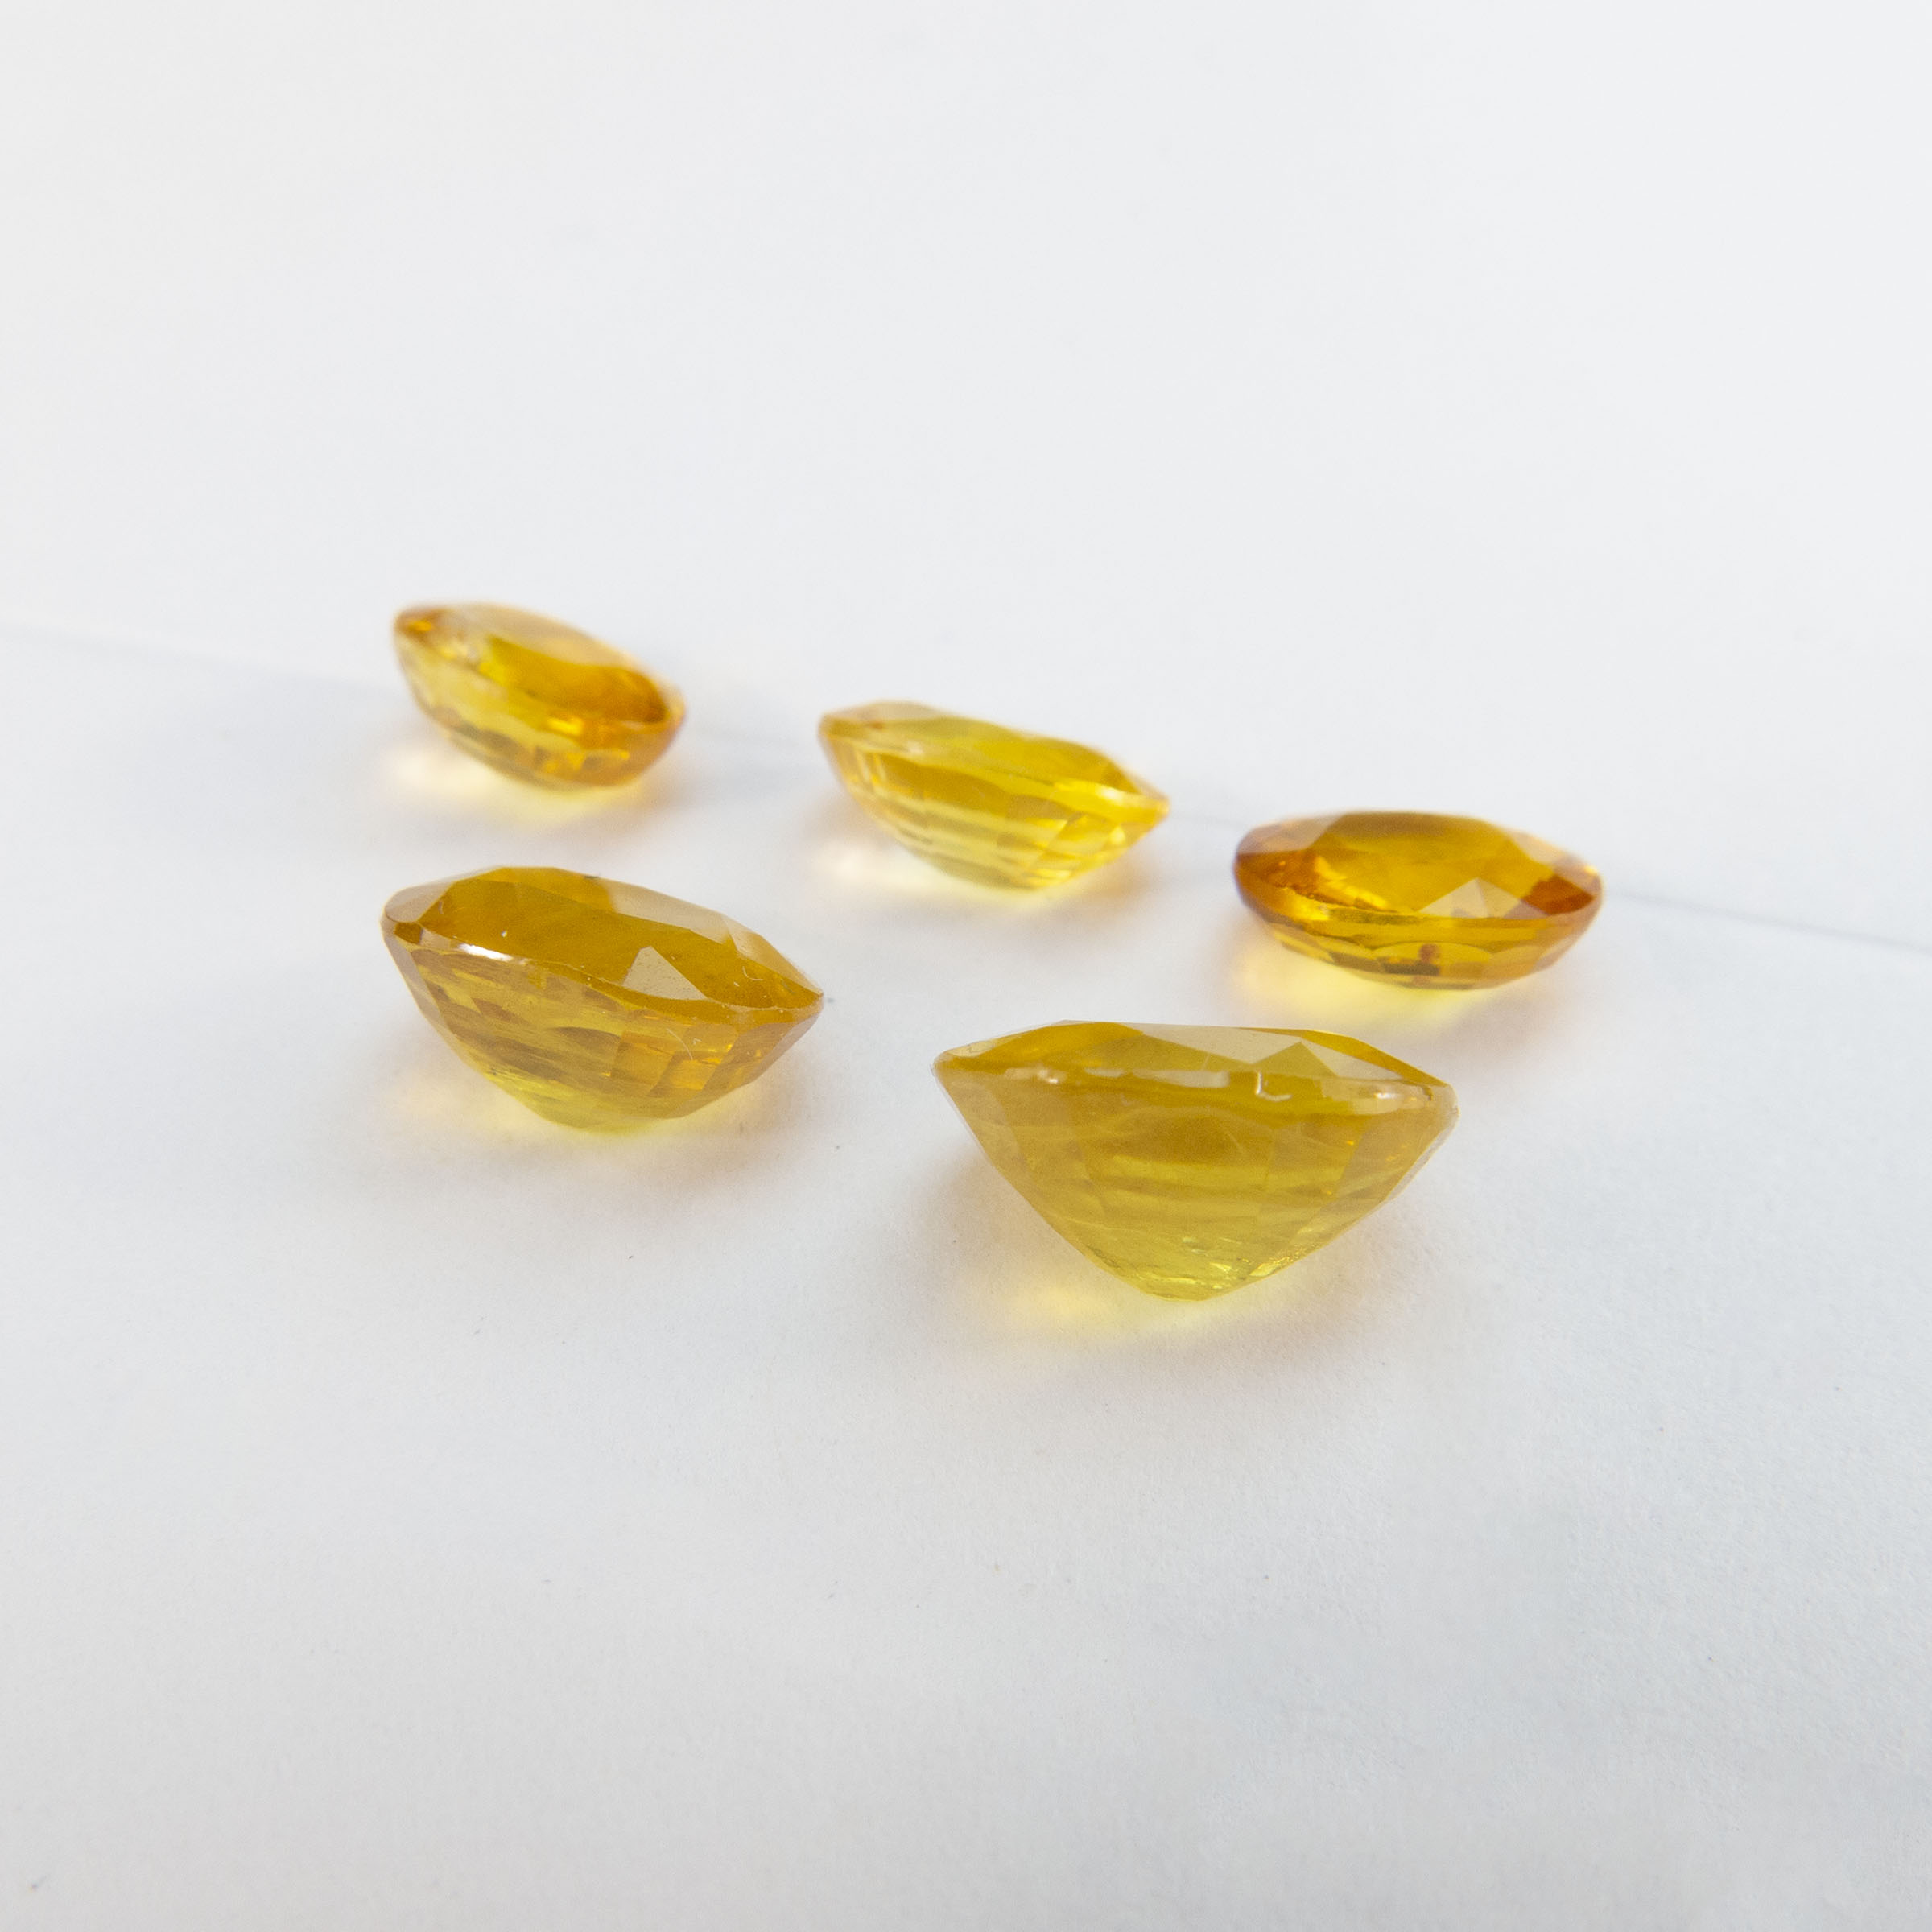 5 Oval Cut Yellow Sapphires